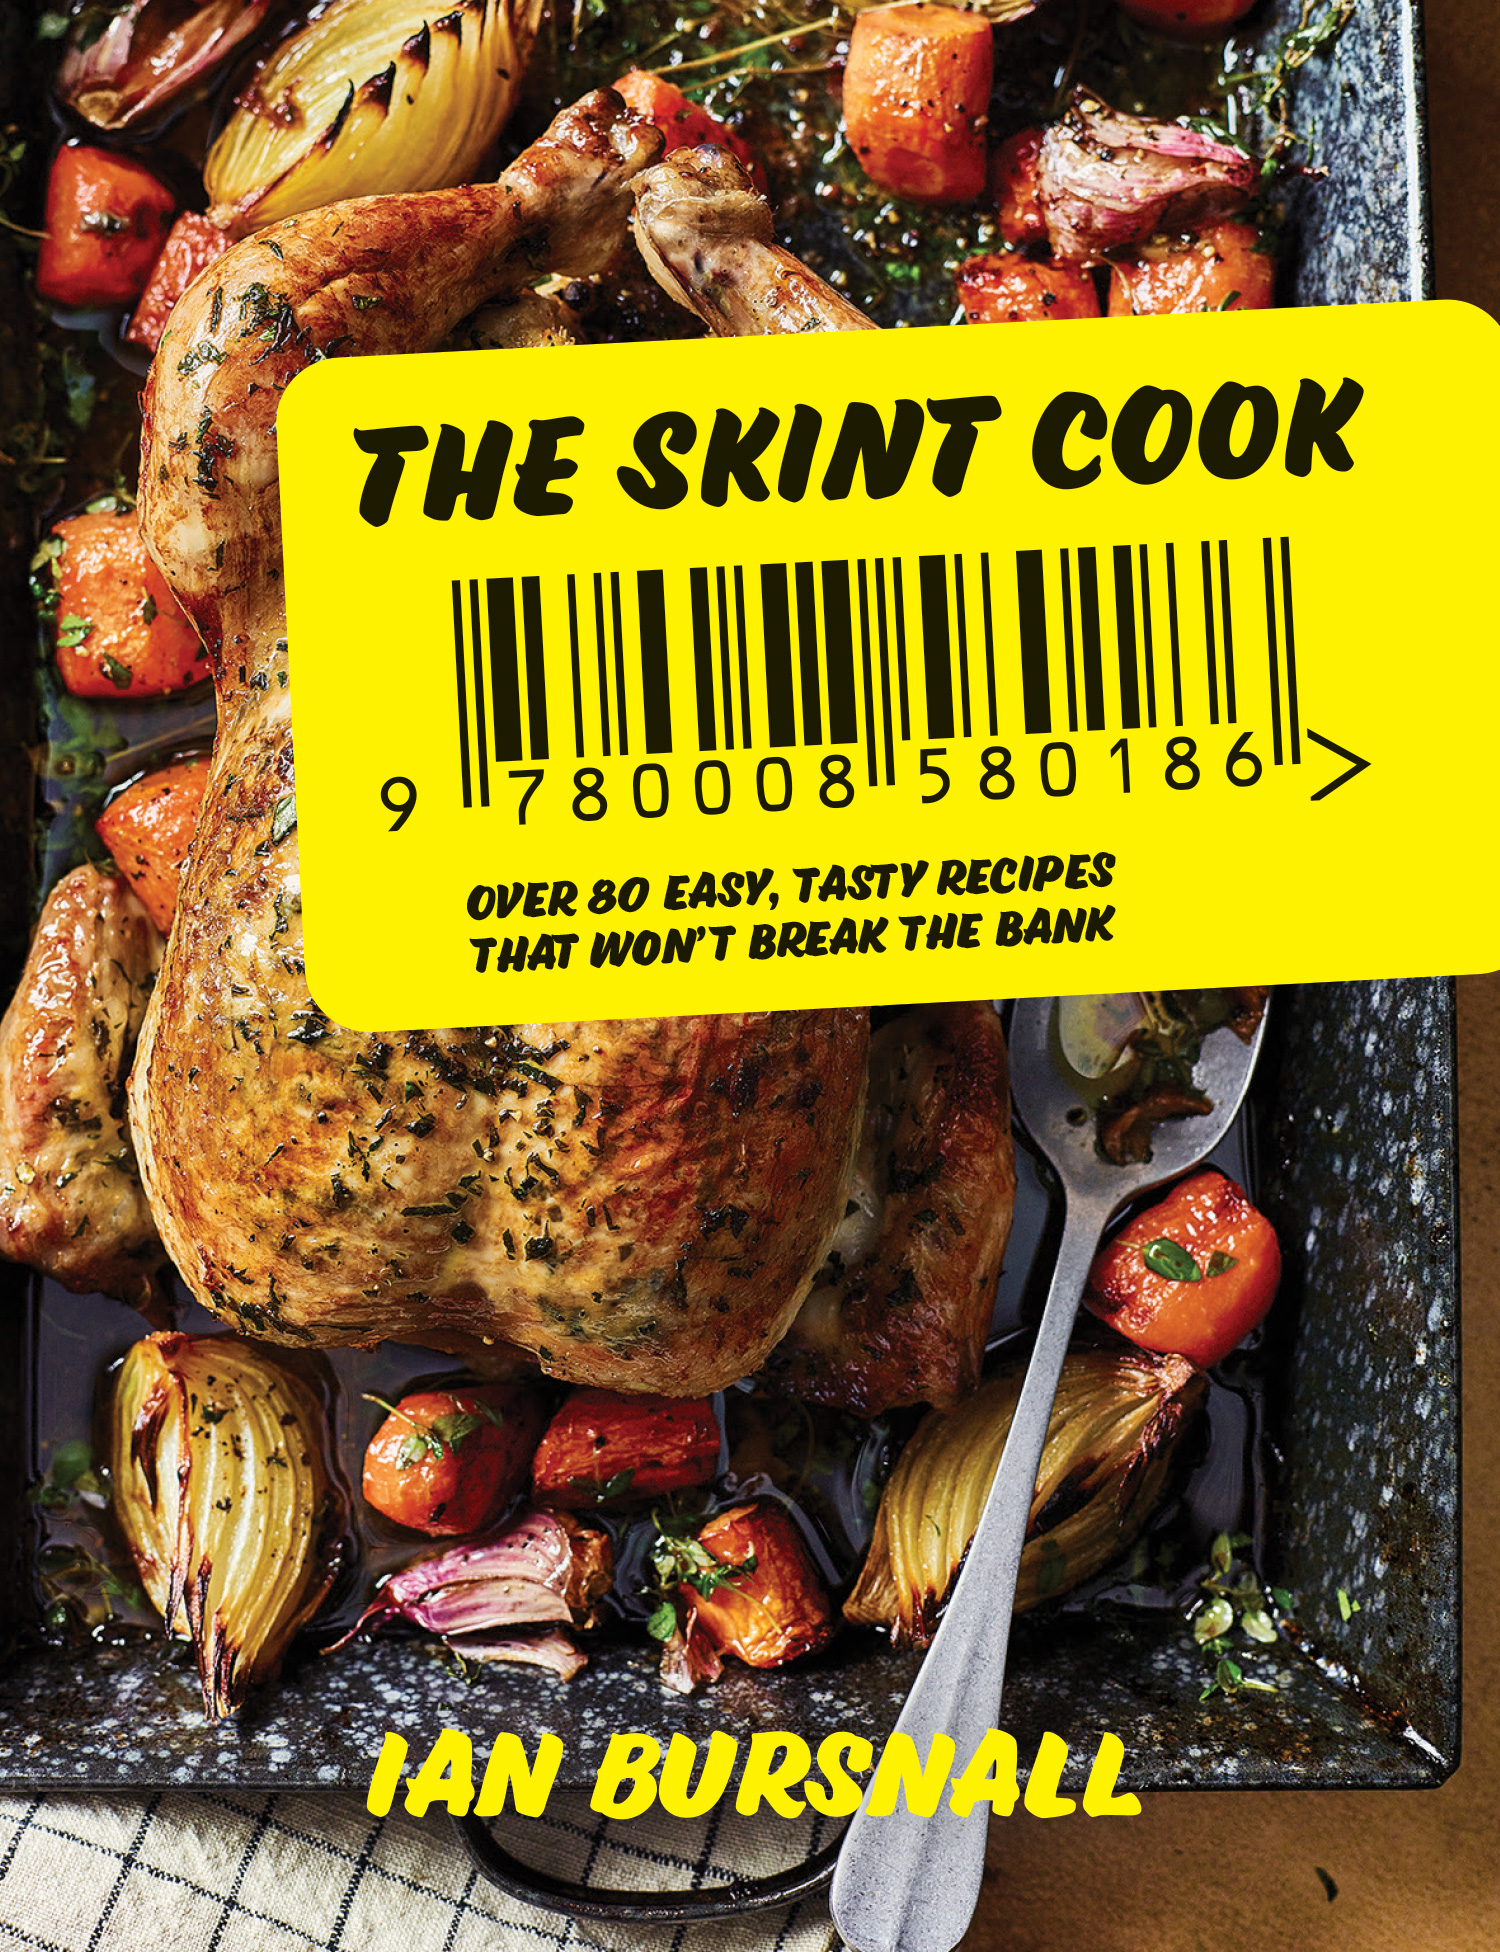 The Skint Cook: Over 80 Easy, Tasty Recipes That Won’t Break The Bank by Ian Bursnall